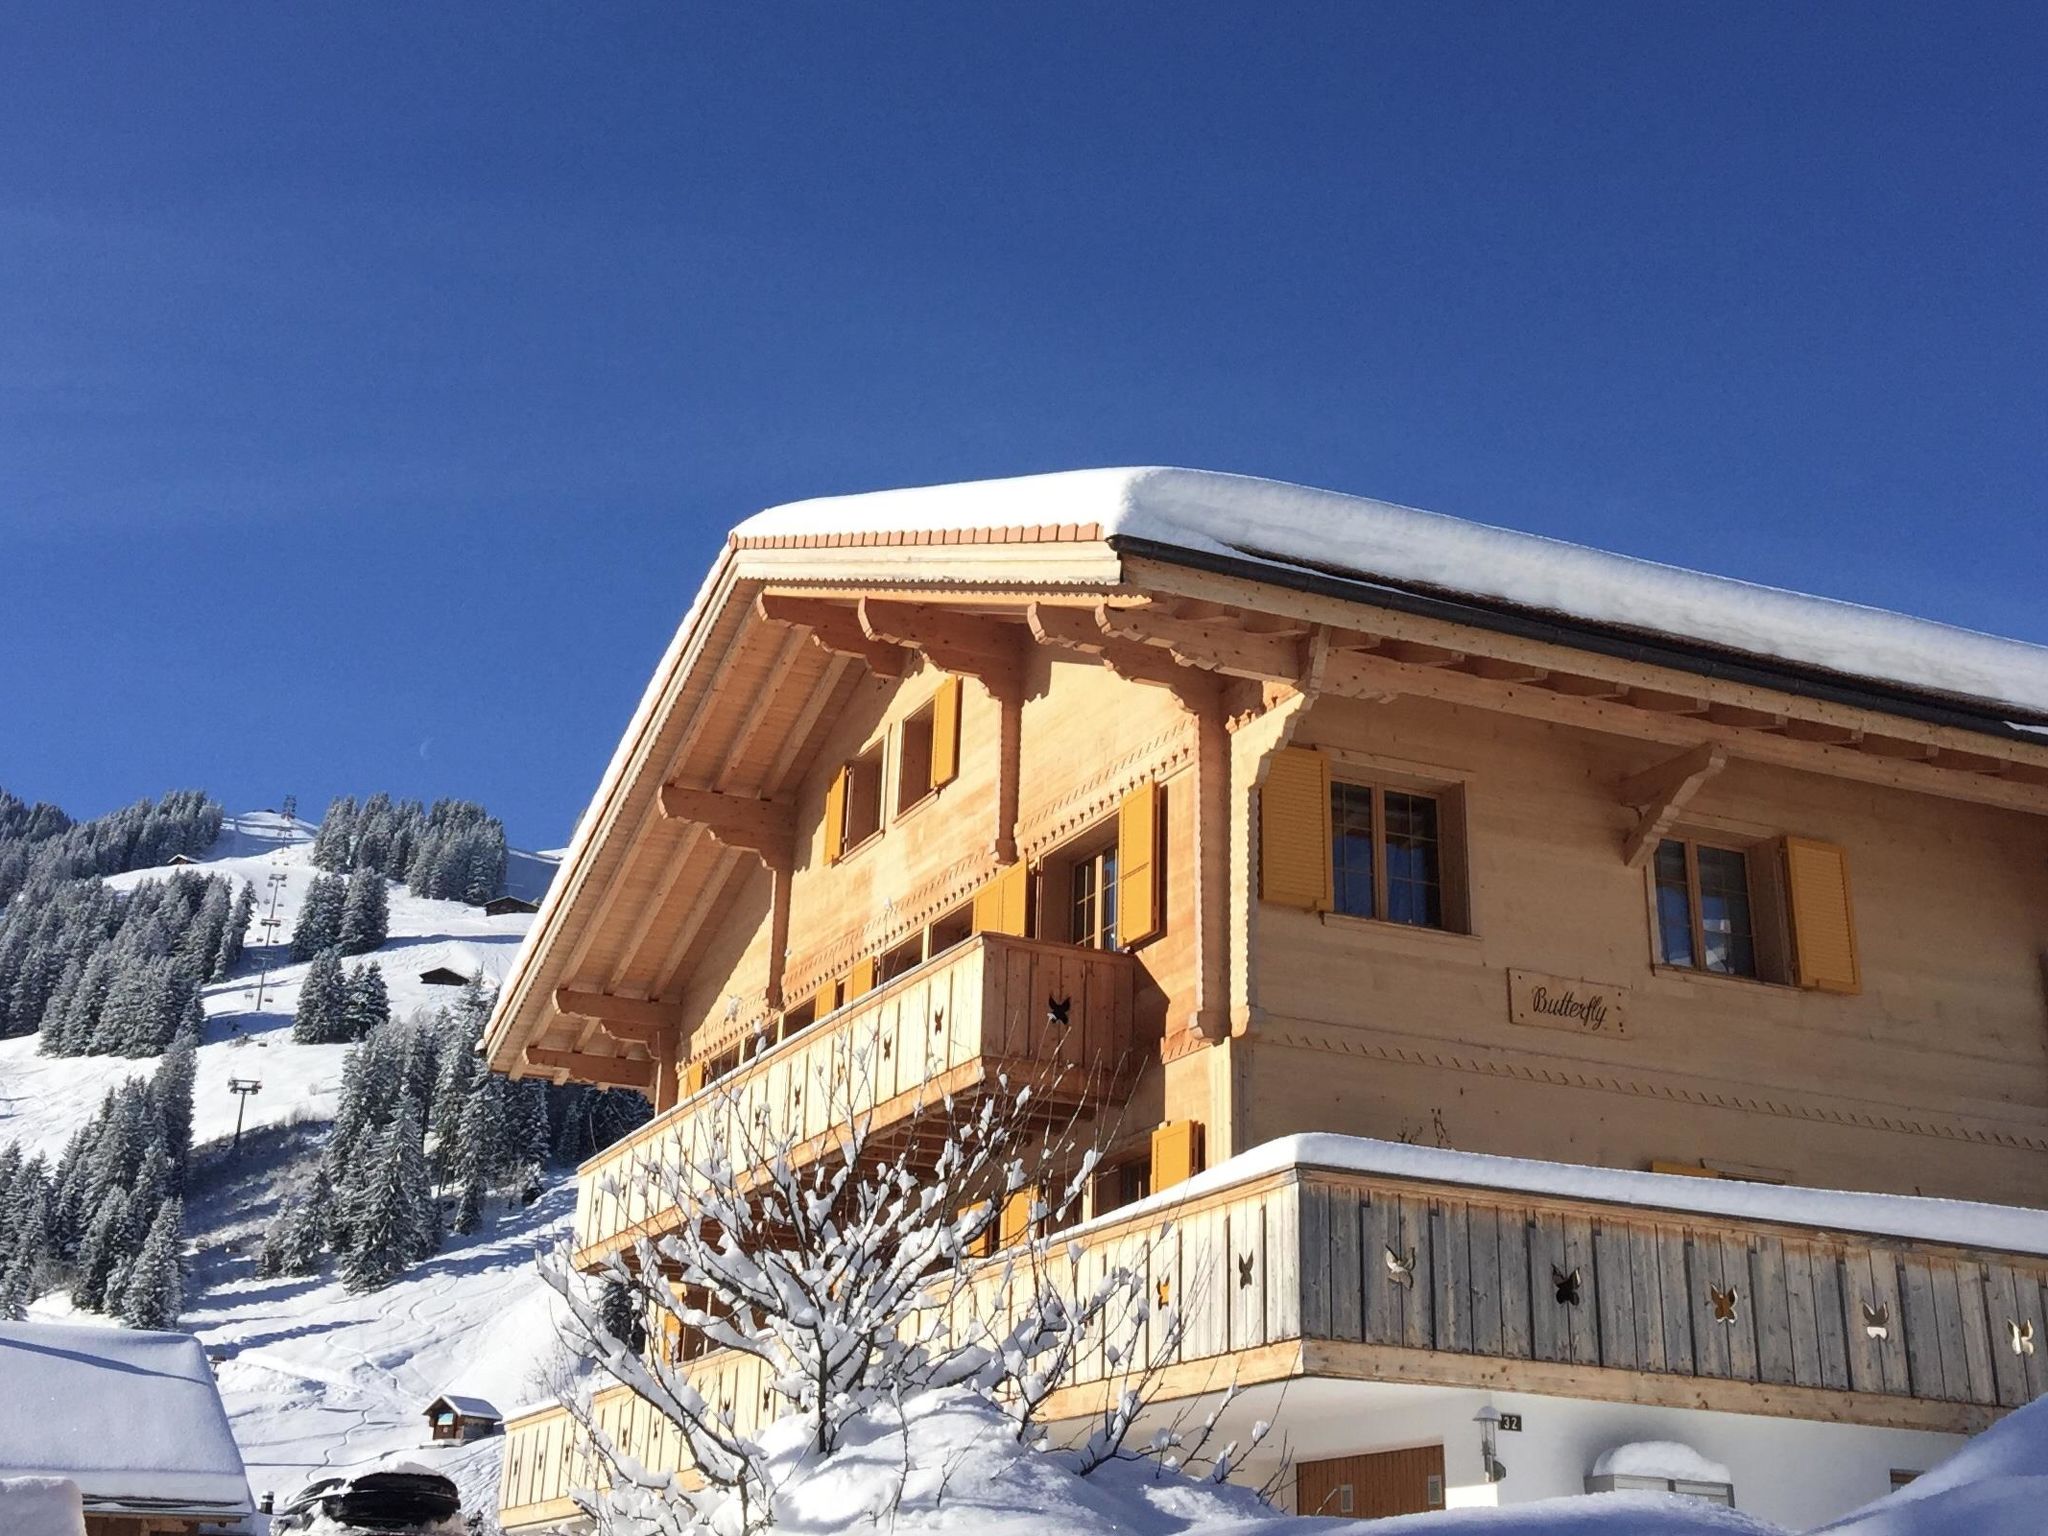 Butterfly  with 3 bedrooms and 1.5 bathrooms - Adelboden